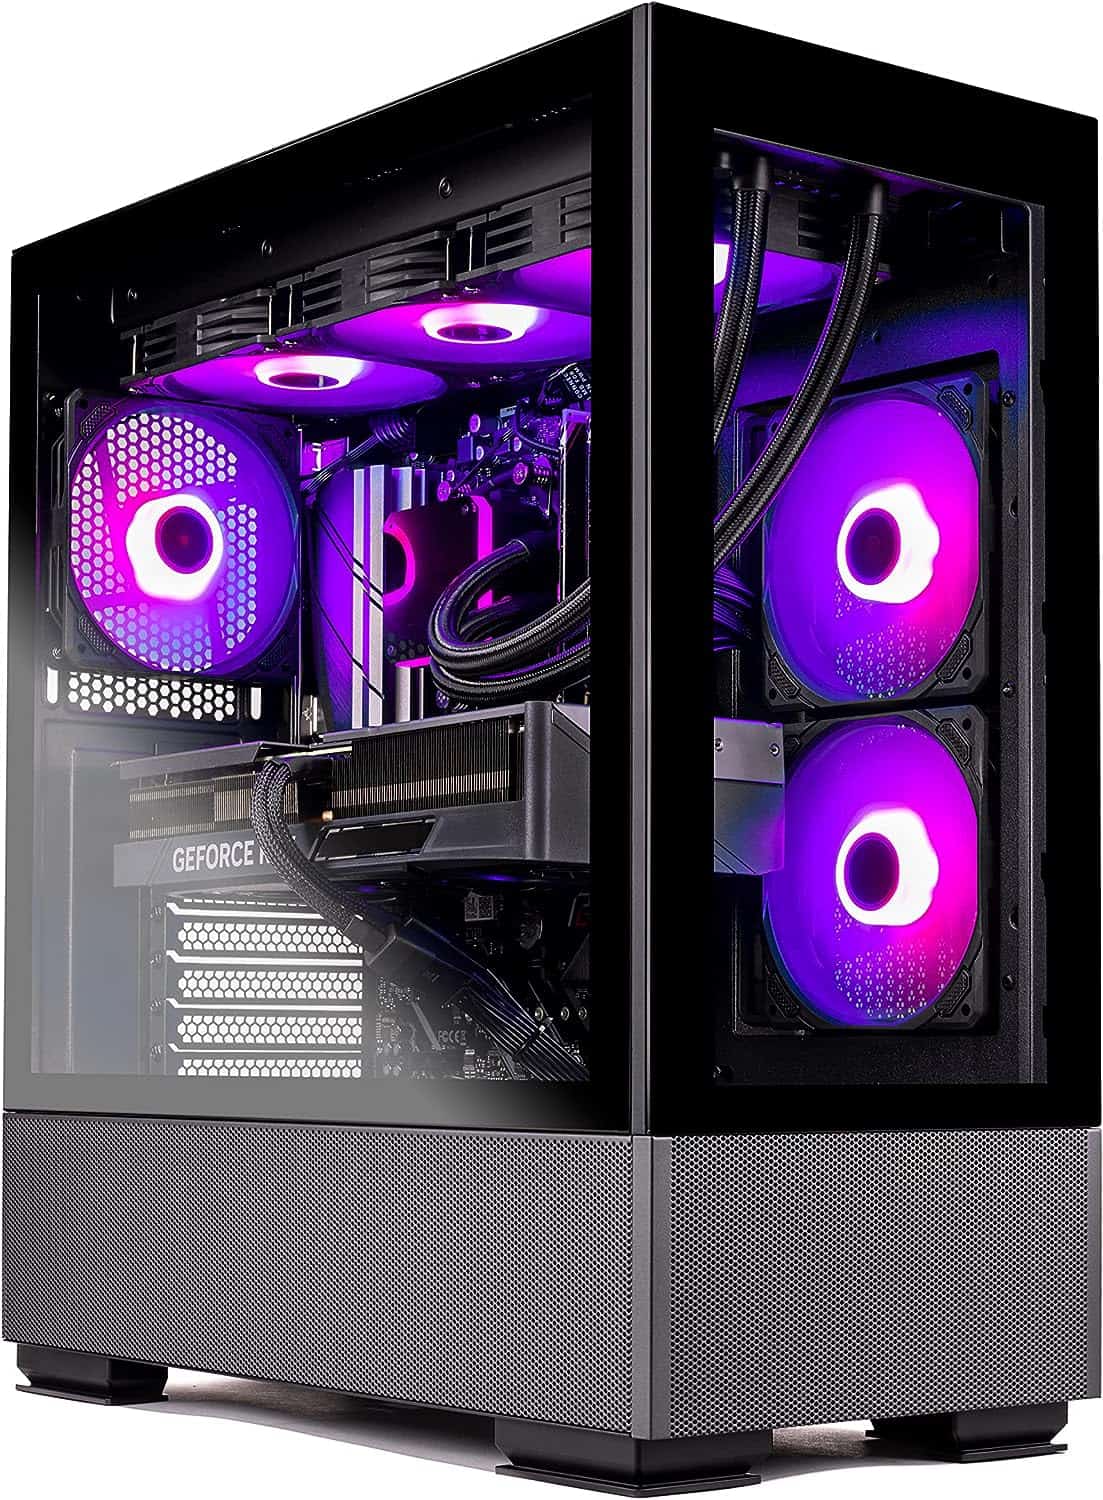 Skytech Gaming Azure Gaming PC Desktop with purple lights on its case.